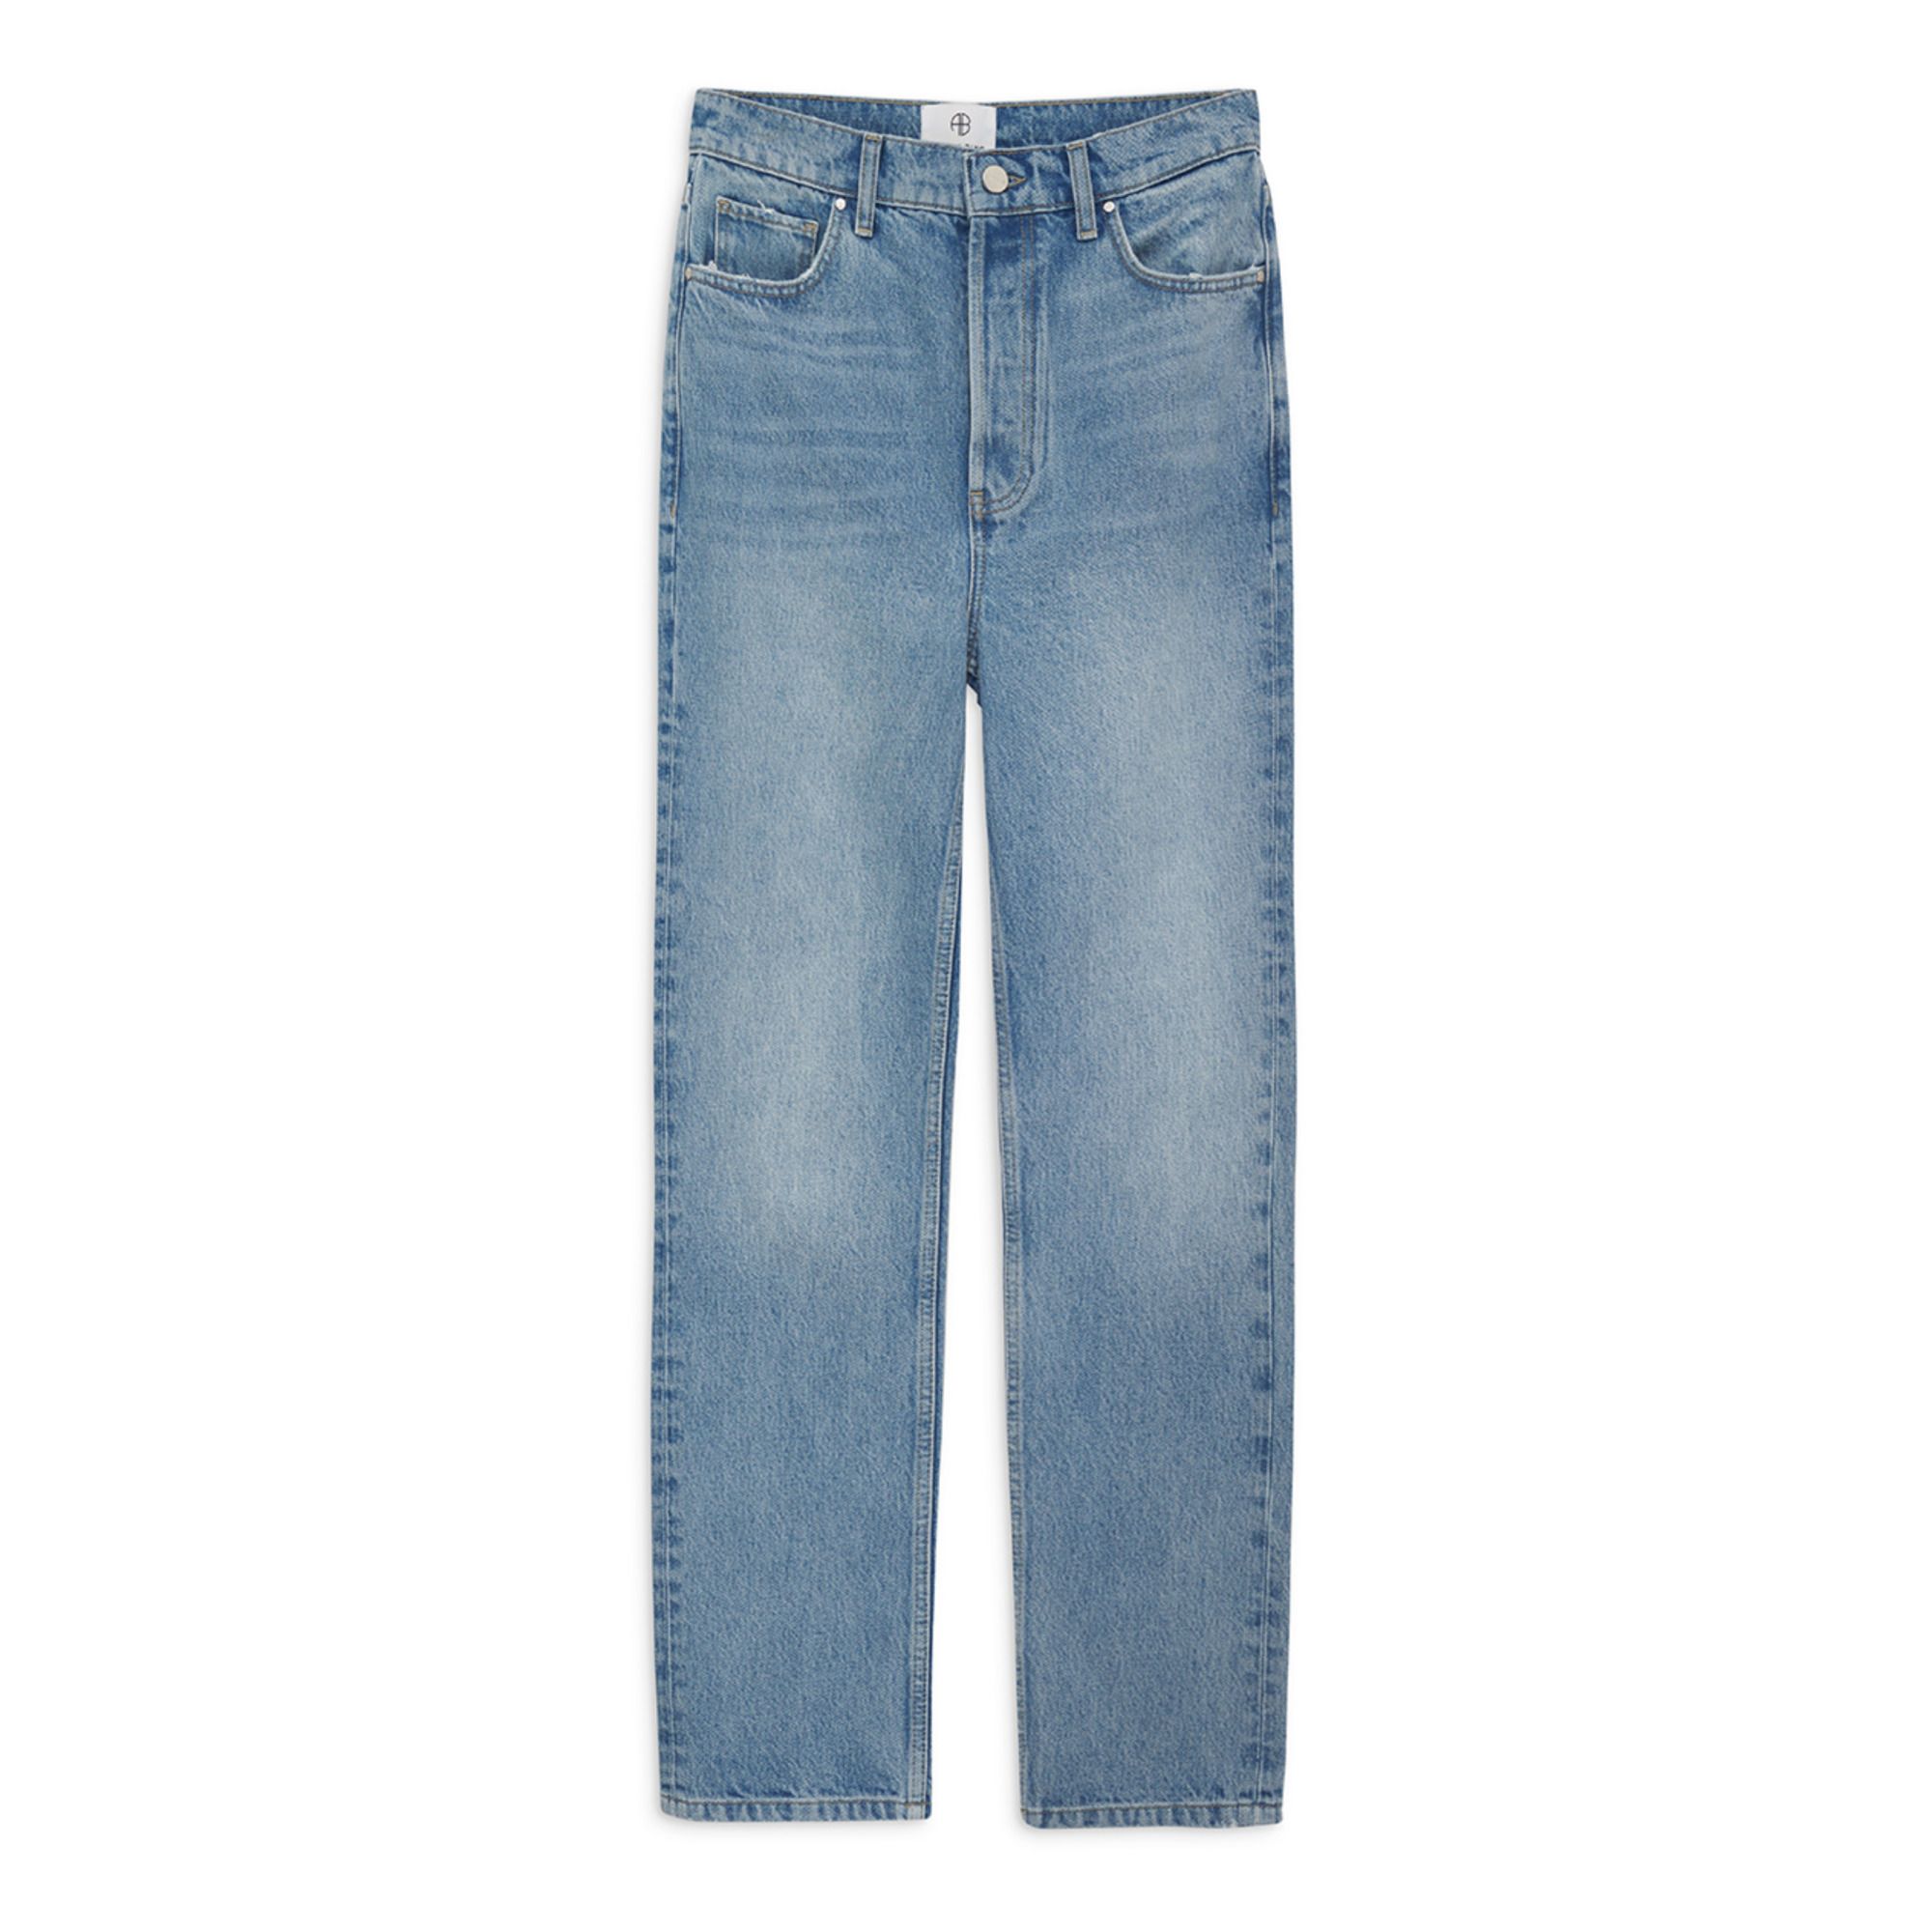 Anine Bing - Jackie Jeans - Pale blue | Smallable